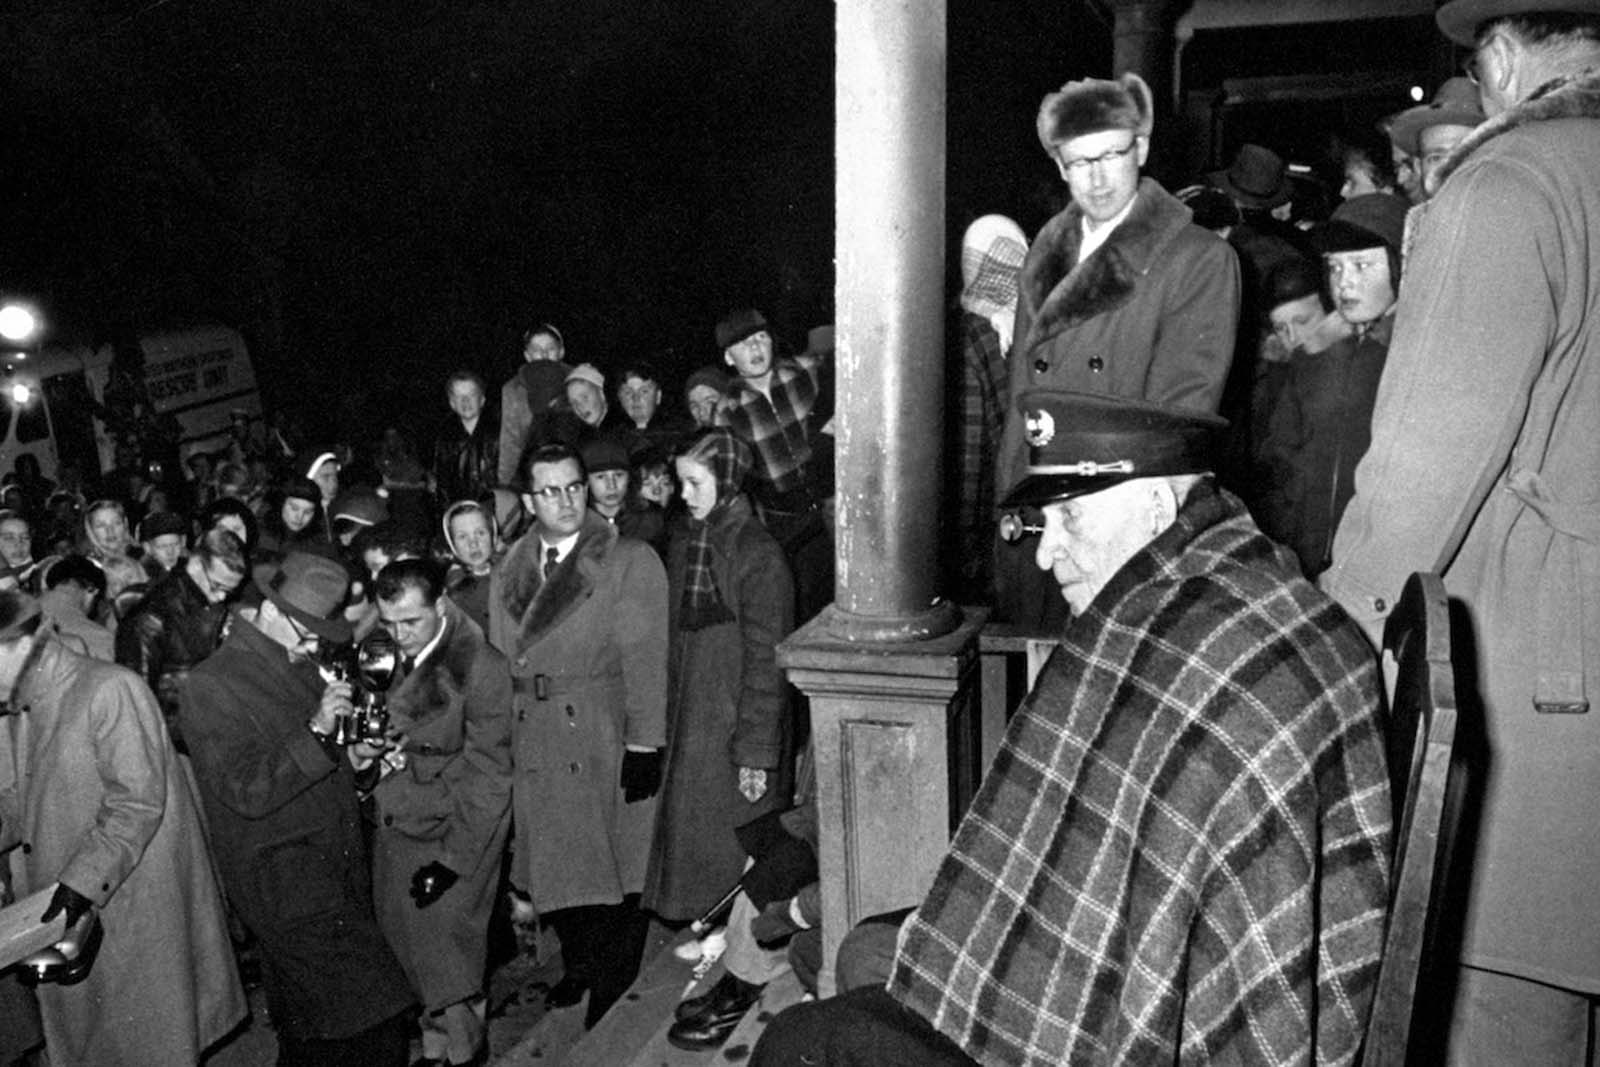 107 years old last remaining Grand Army of the Republic (GAR) Civil War Veteran Albert Woolson (seated) sitting in the front porch wearing a military hat and blanket while people and photographers are passing by. 1954.